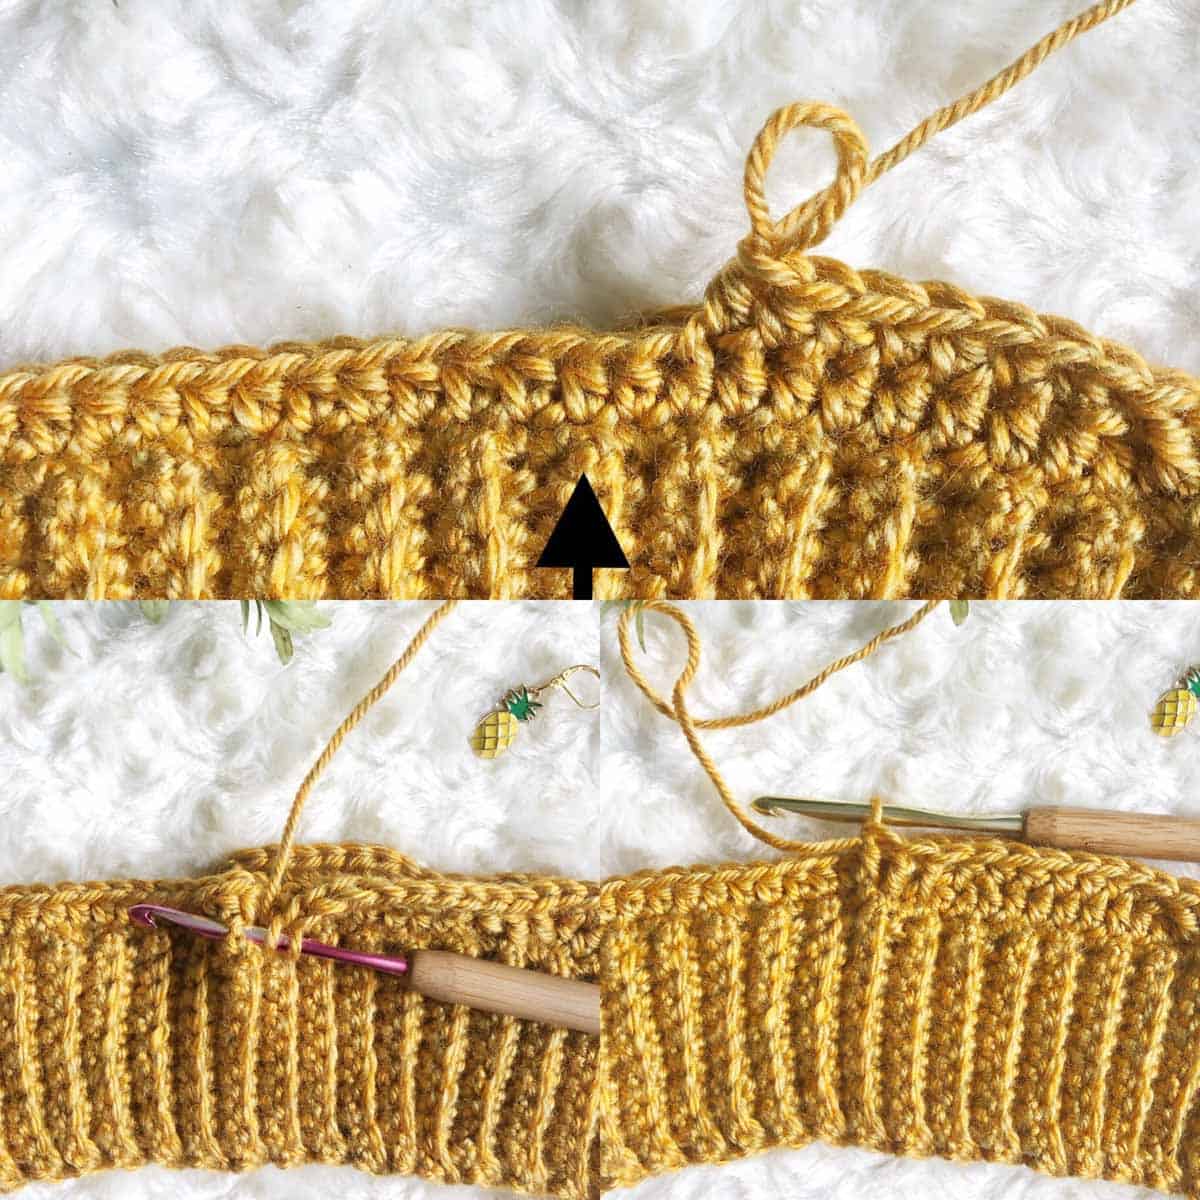 Photos showing how to crochet cables. Tutorial for beginners.